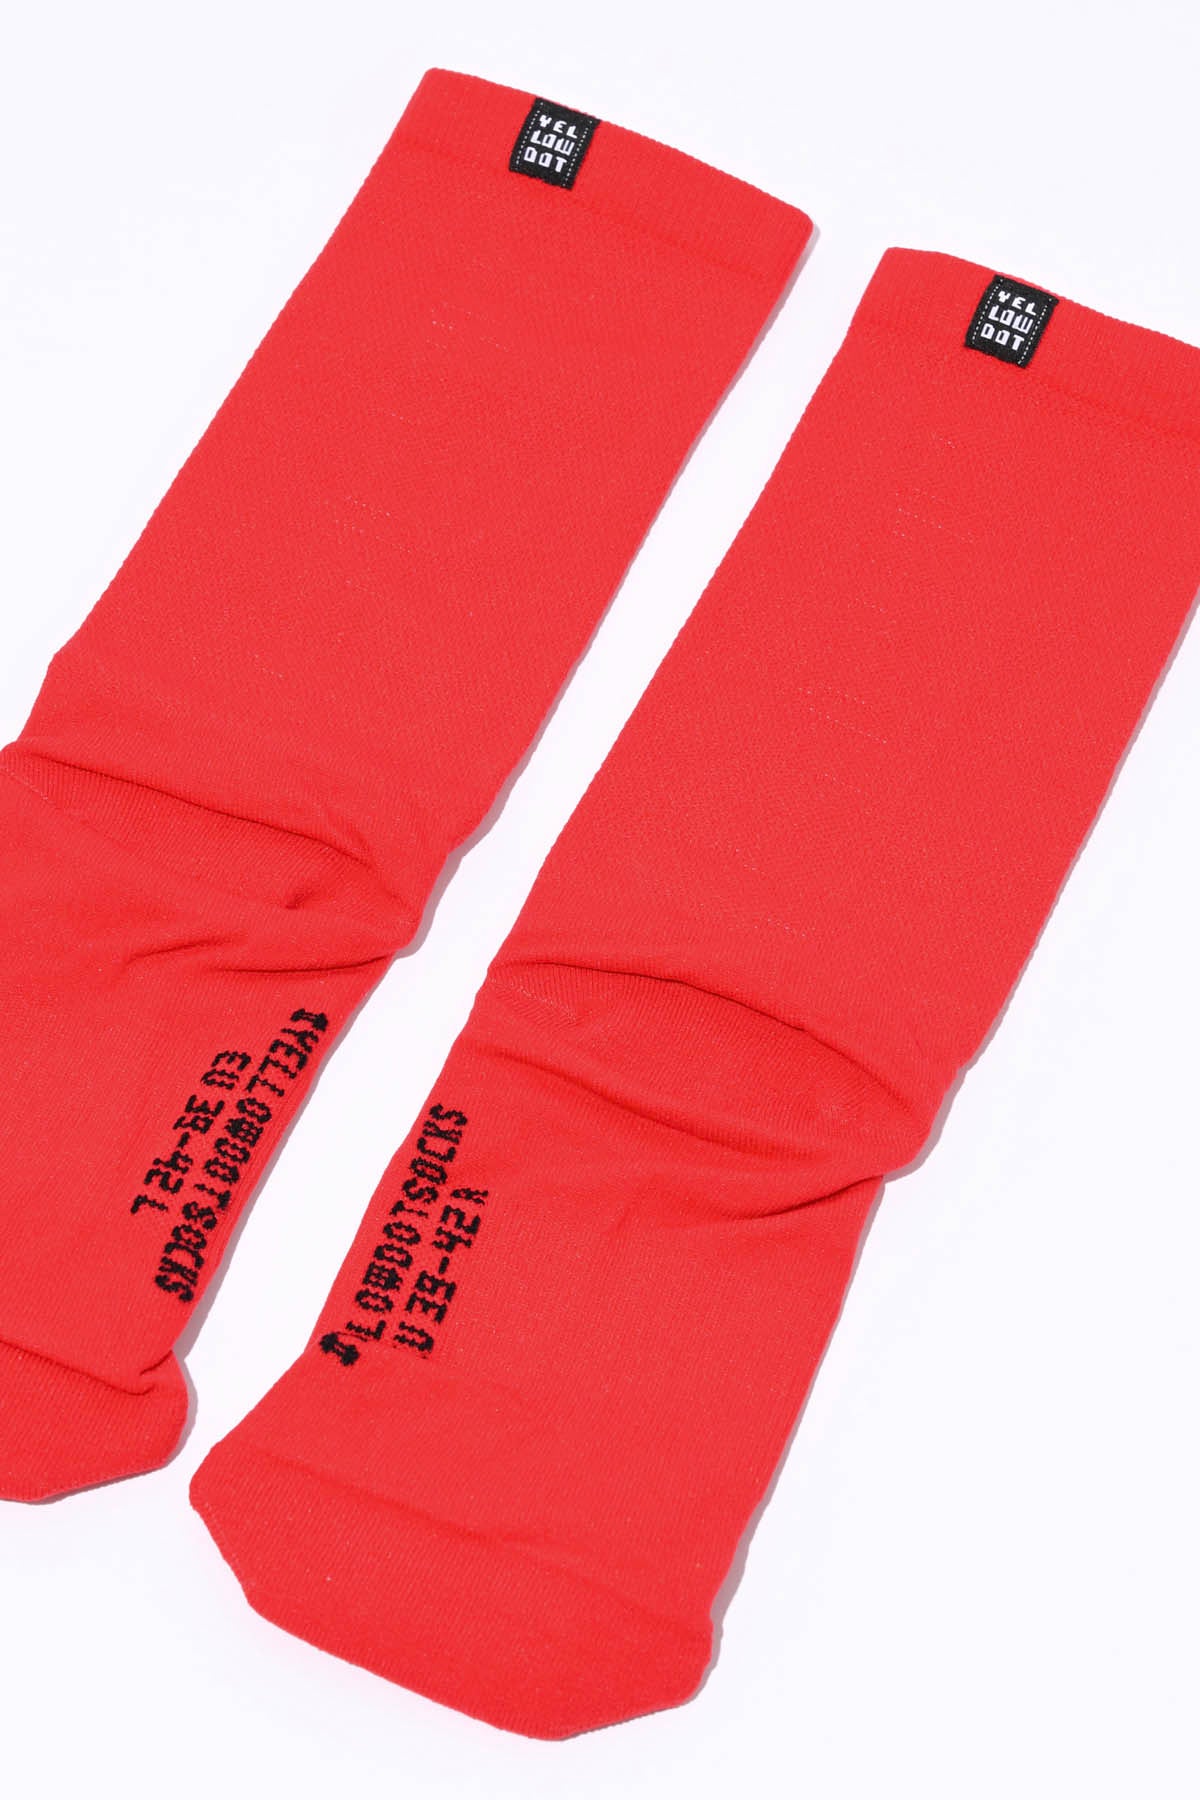 STEALTH - CANDY APPLE RED PACKSHOT | BEST CYCLING SOCKS